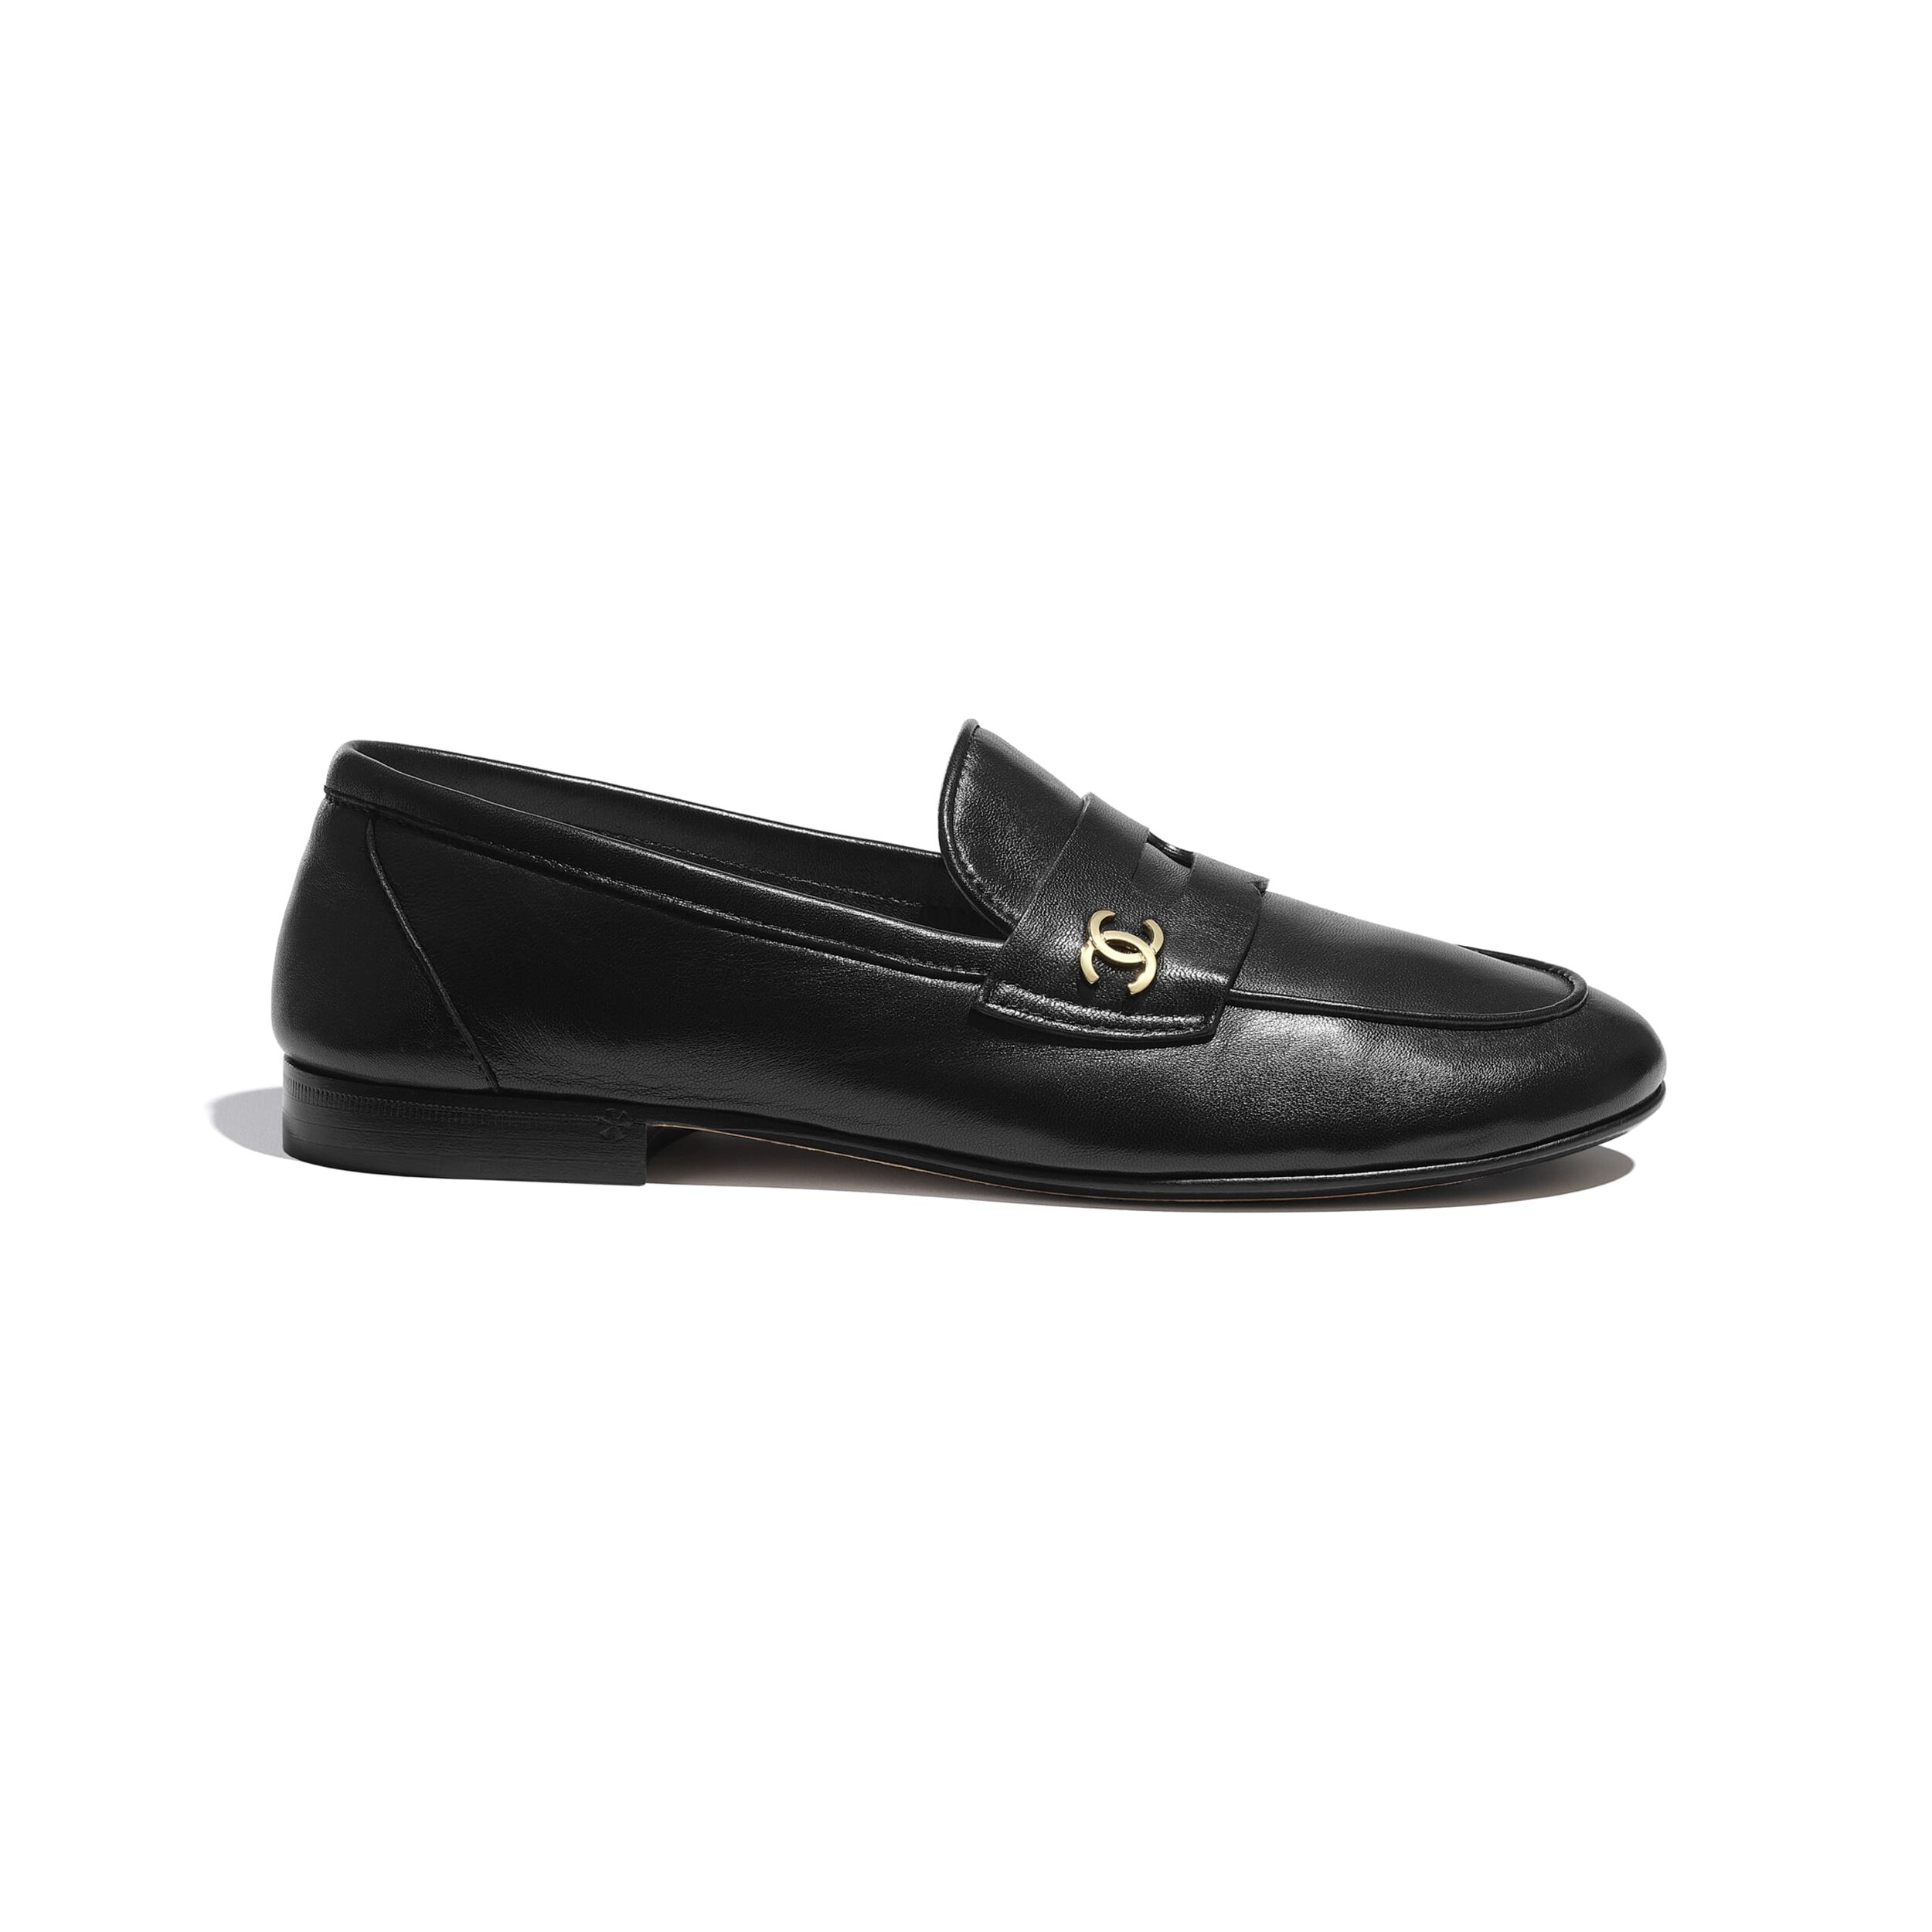 loafers chanel shoes 37